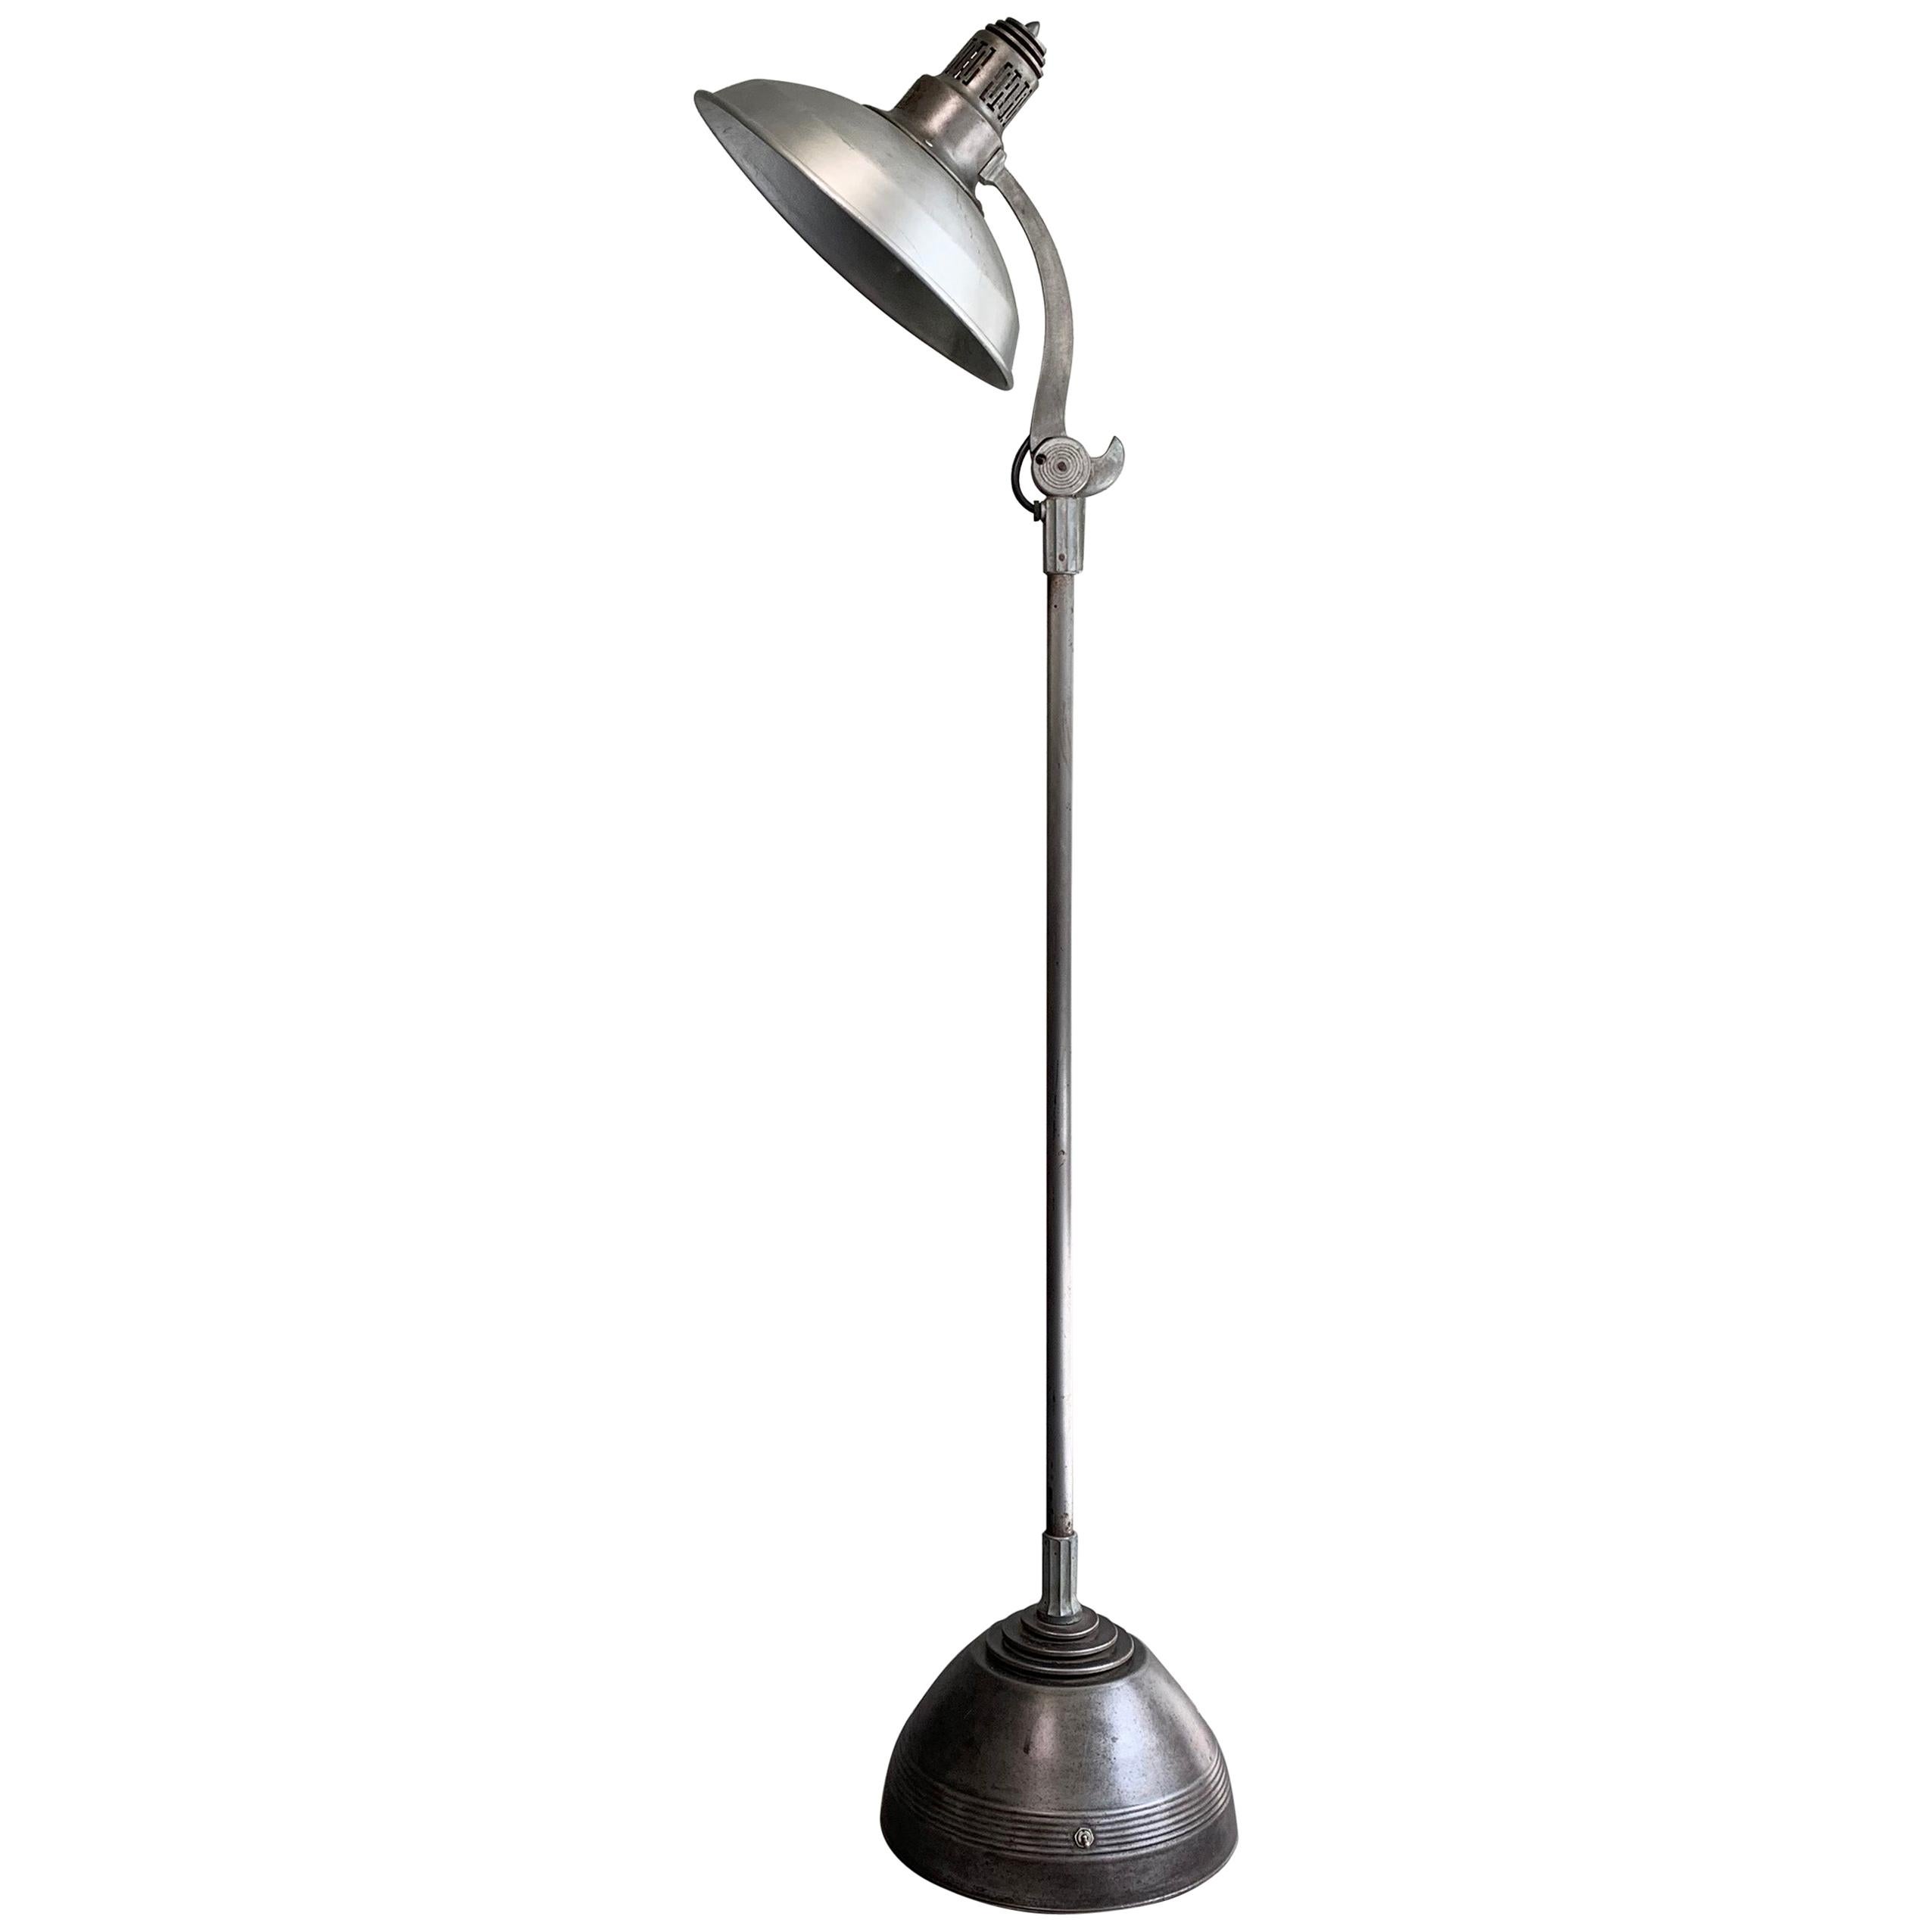 Industrial, Machine Age, brushed steel, General Electric sunlamp, medical floor lamp with wide 14.5 inch shade that adjusts up and down in 3 positions. The base is 12 inch diameter. The lamp is wired to accept a medium socket bulb up to 200 watts.